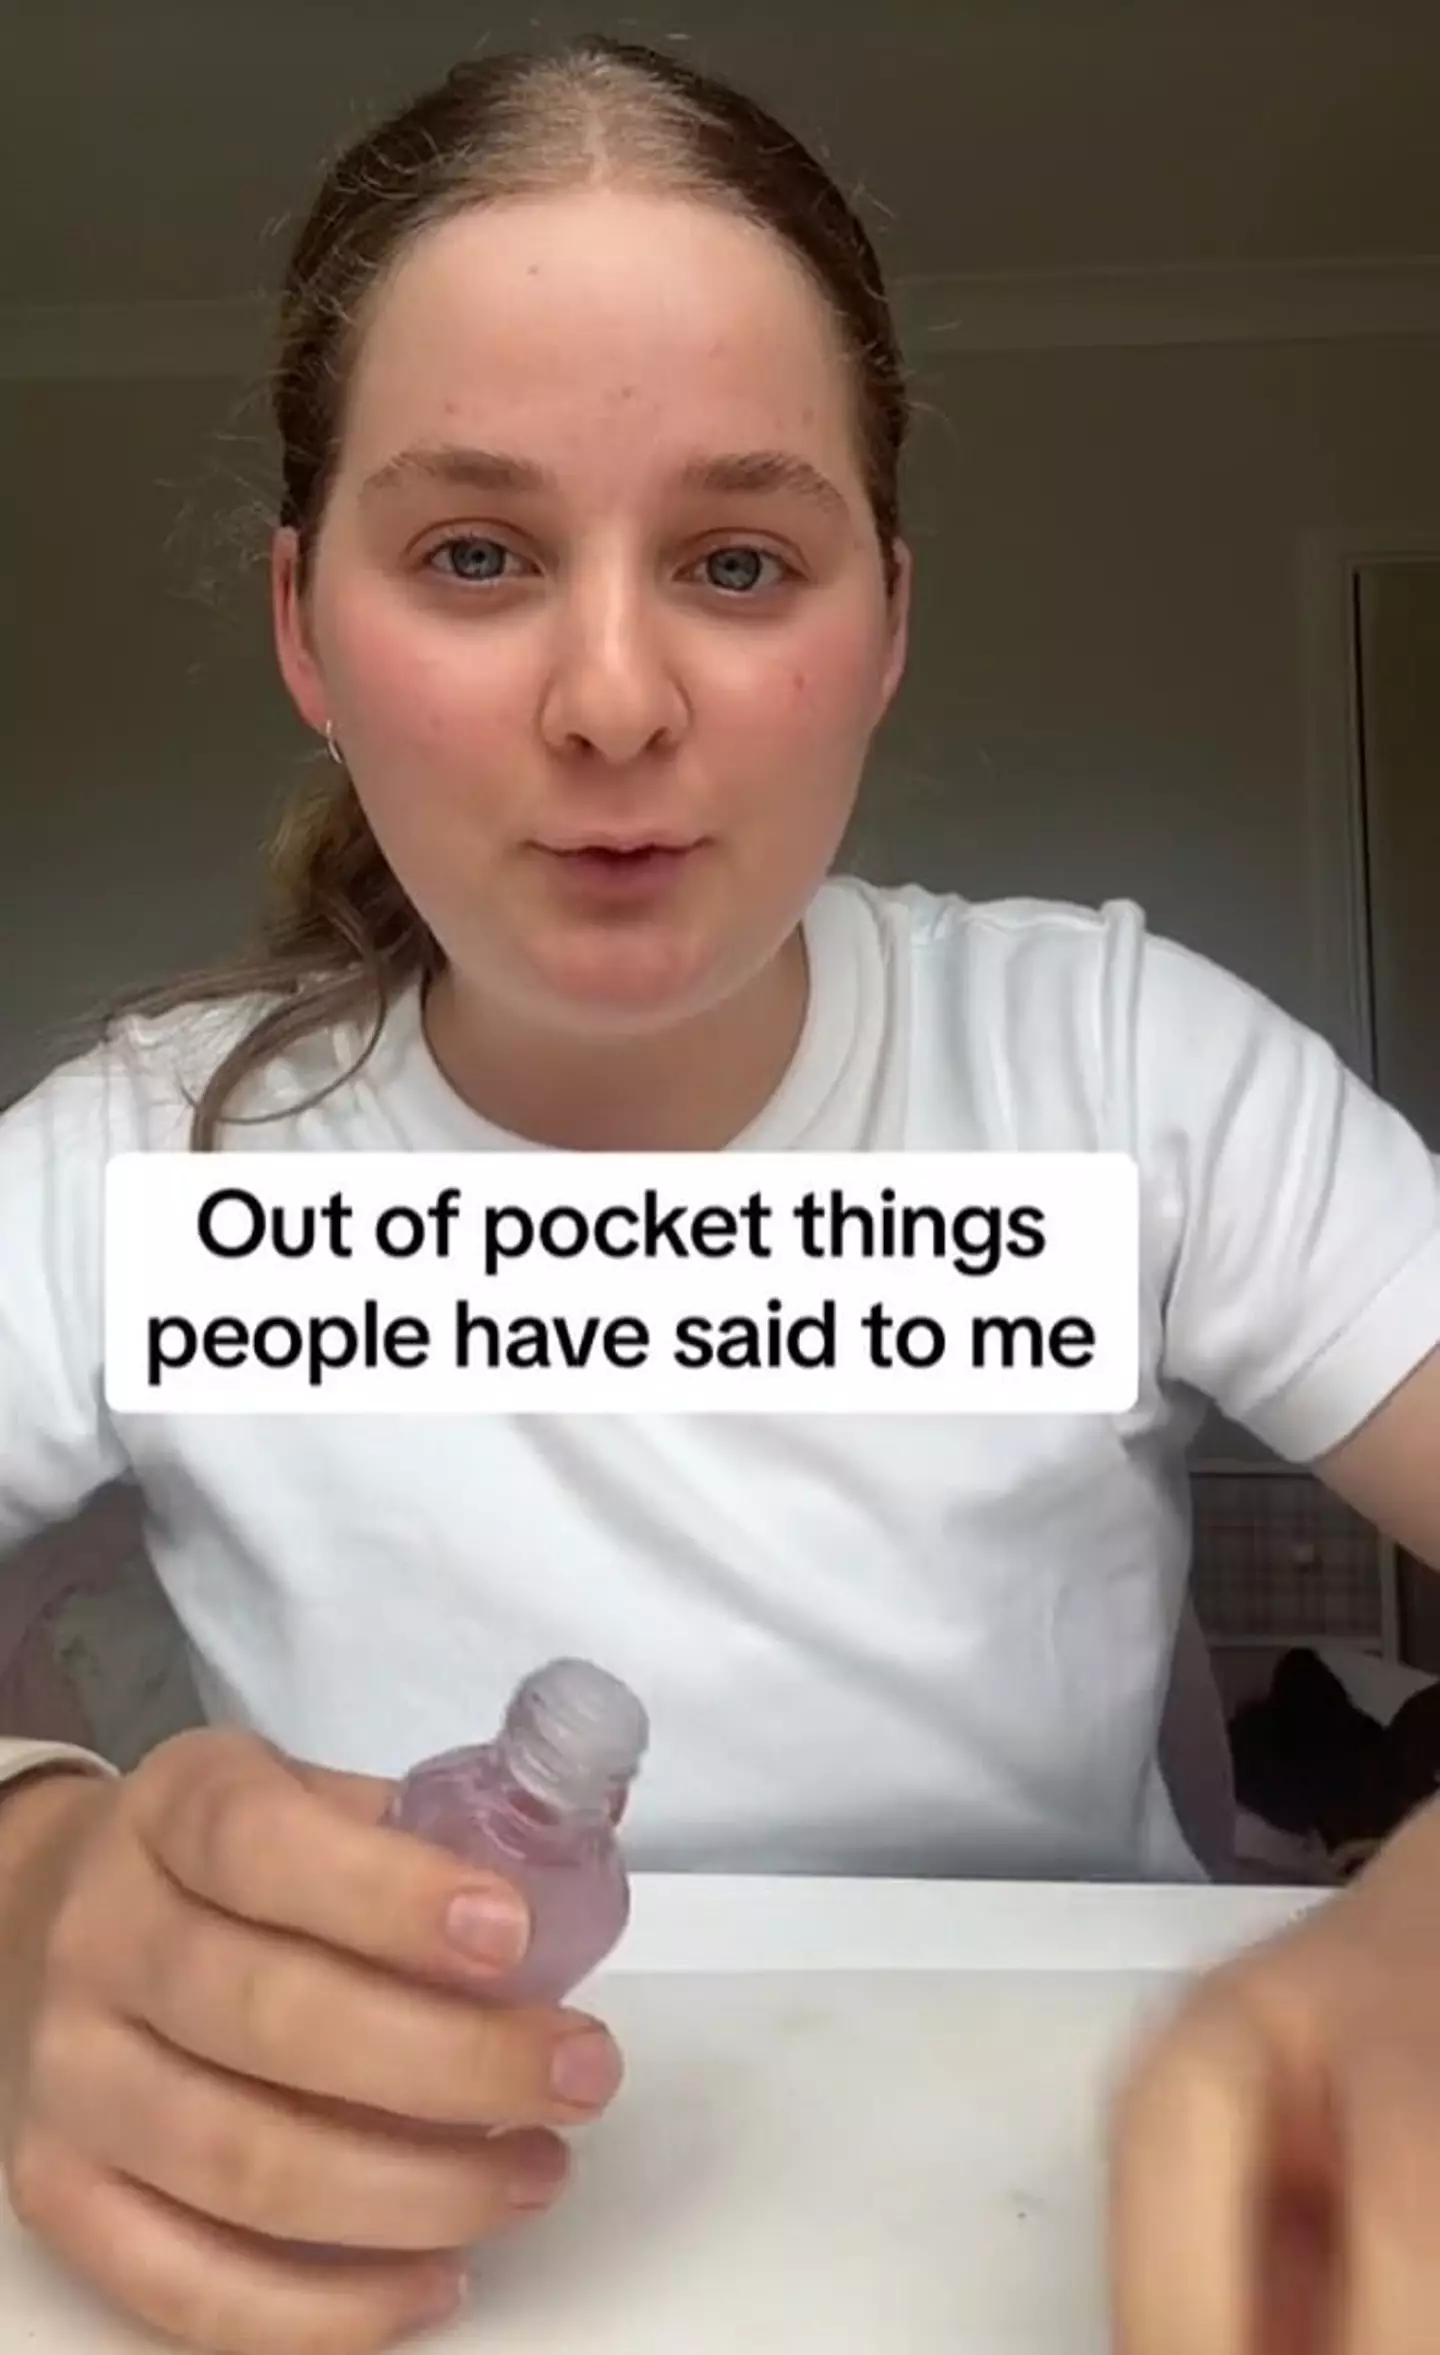 The Australia-based social media influencer - who has nearly 150,000 followers on TikTok - recently took to the platform to hit back at a mean comment.